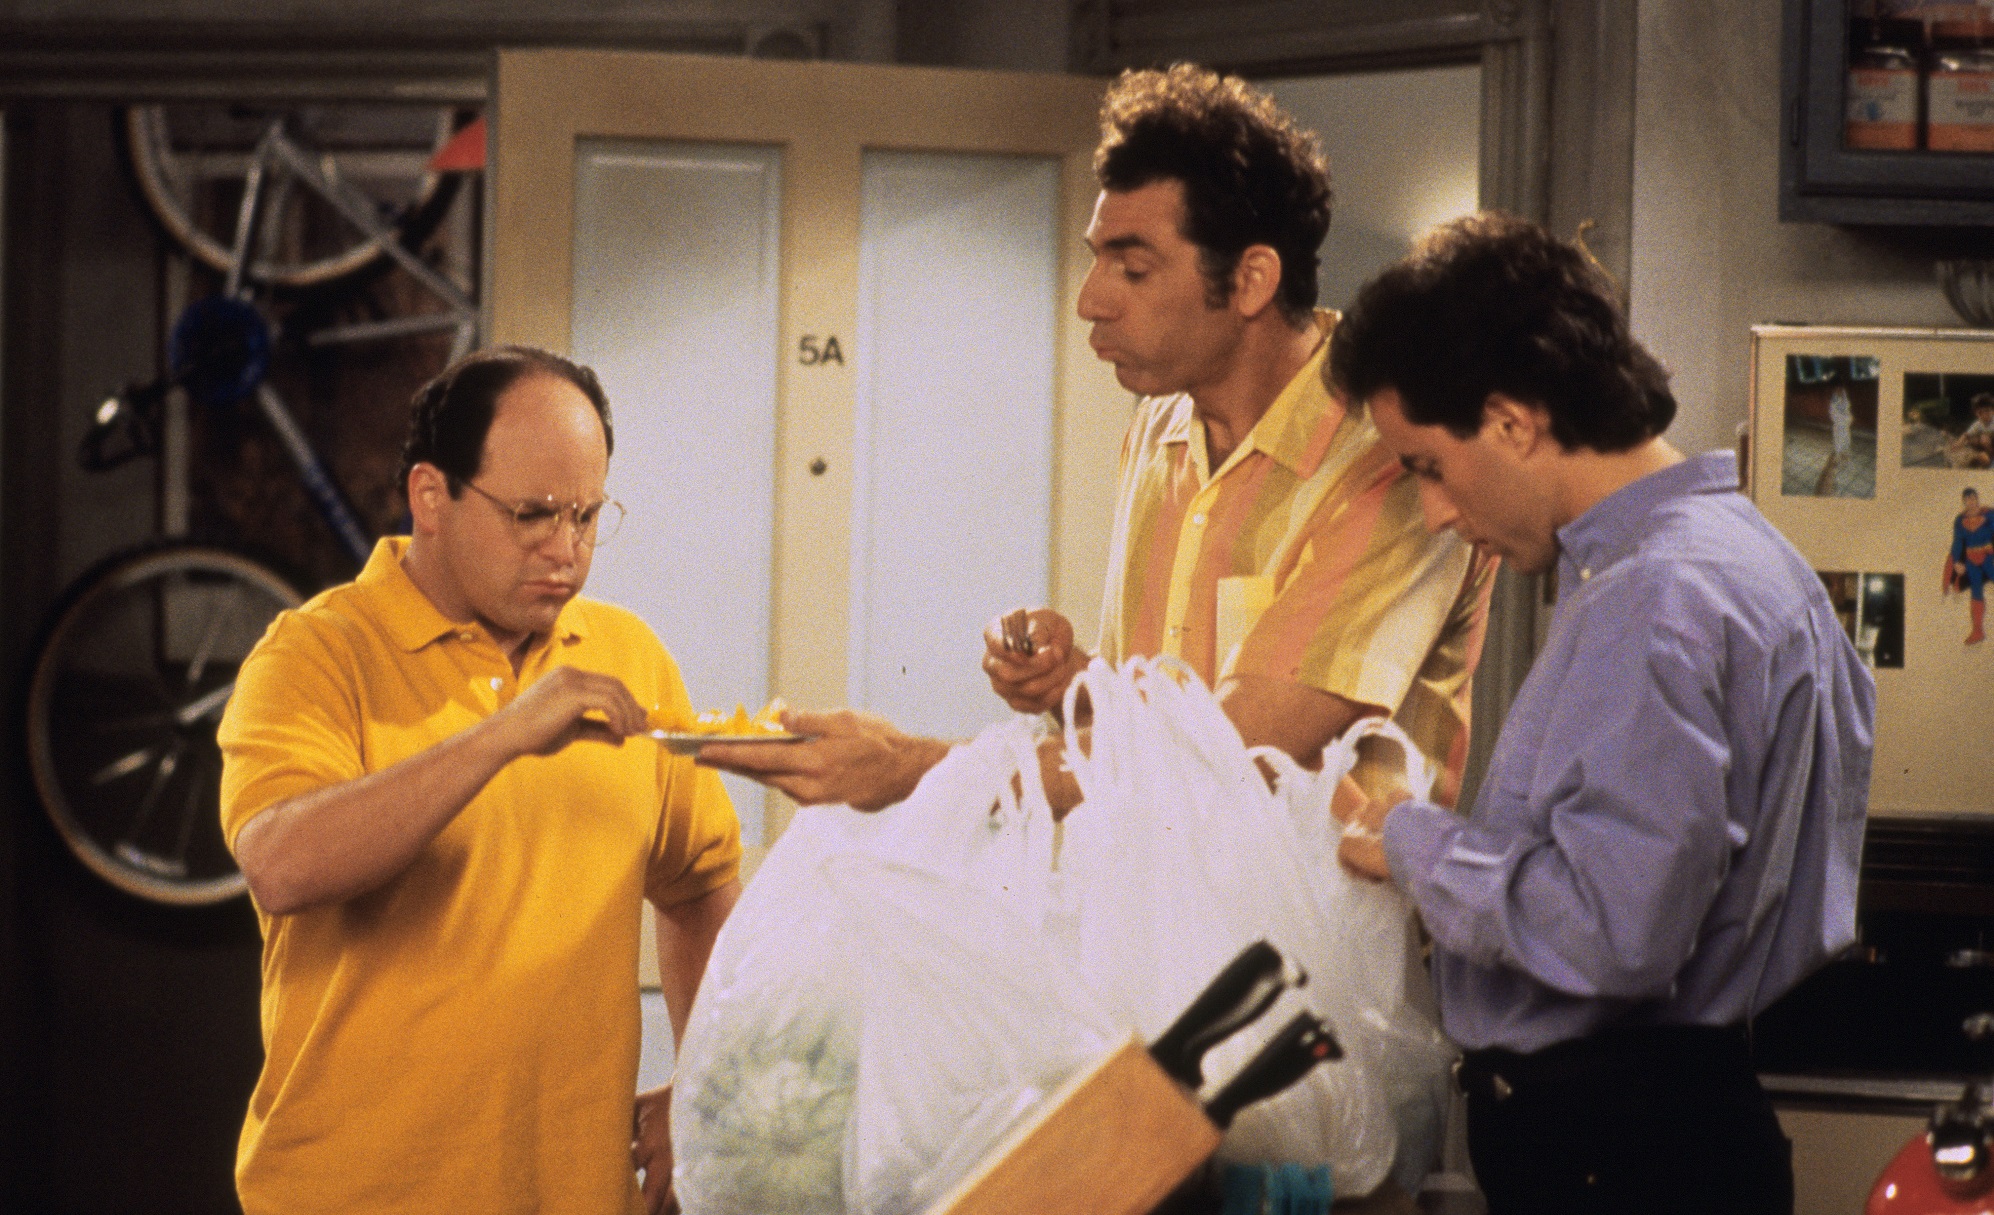 TBS' July 5 Seinfeld marathon schedule is below and all times are ET.